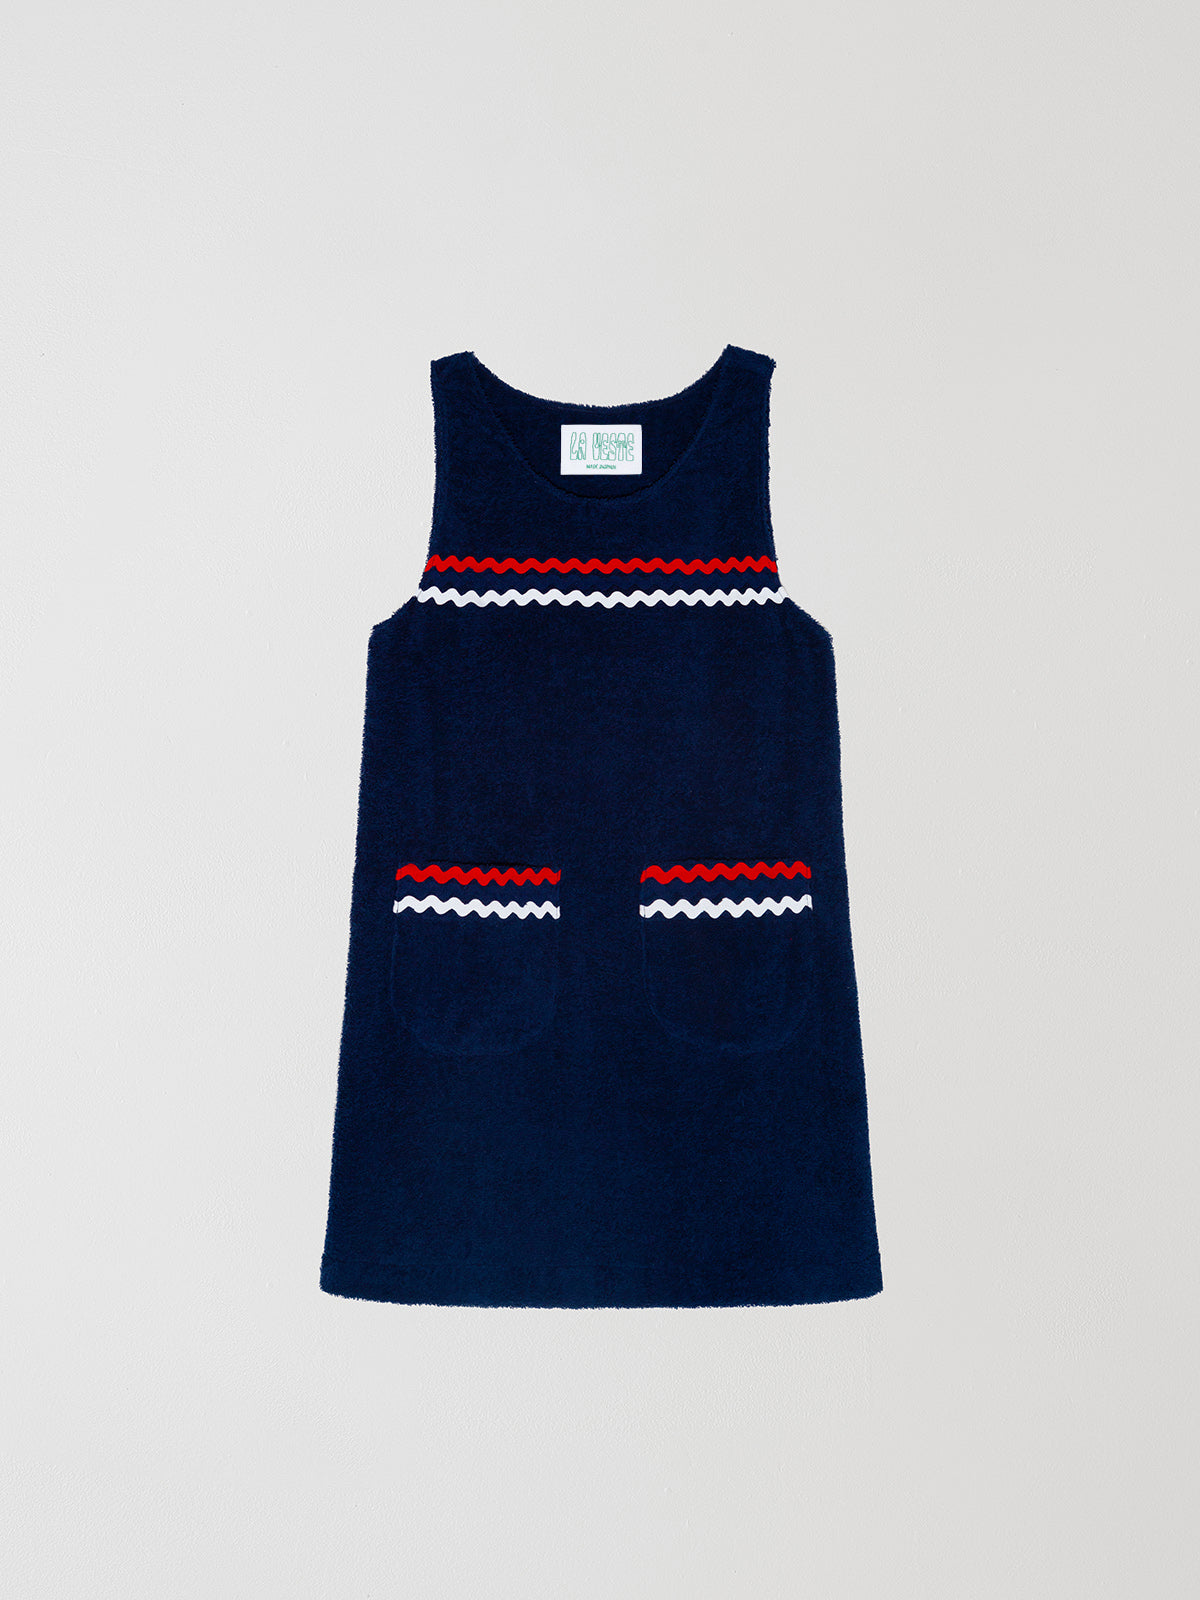 Mini Towel Blue is a navy blue dress with regular fit, round neck, pockets and fringe details.